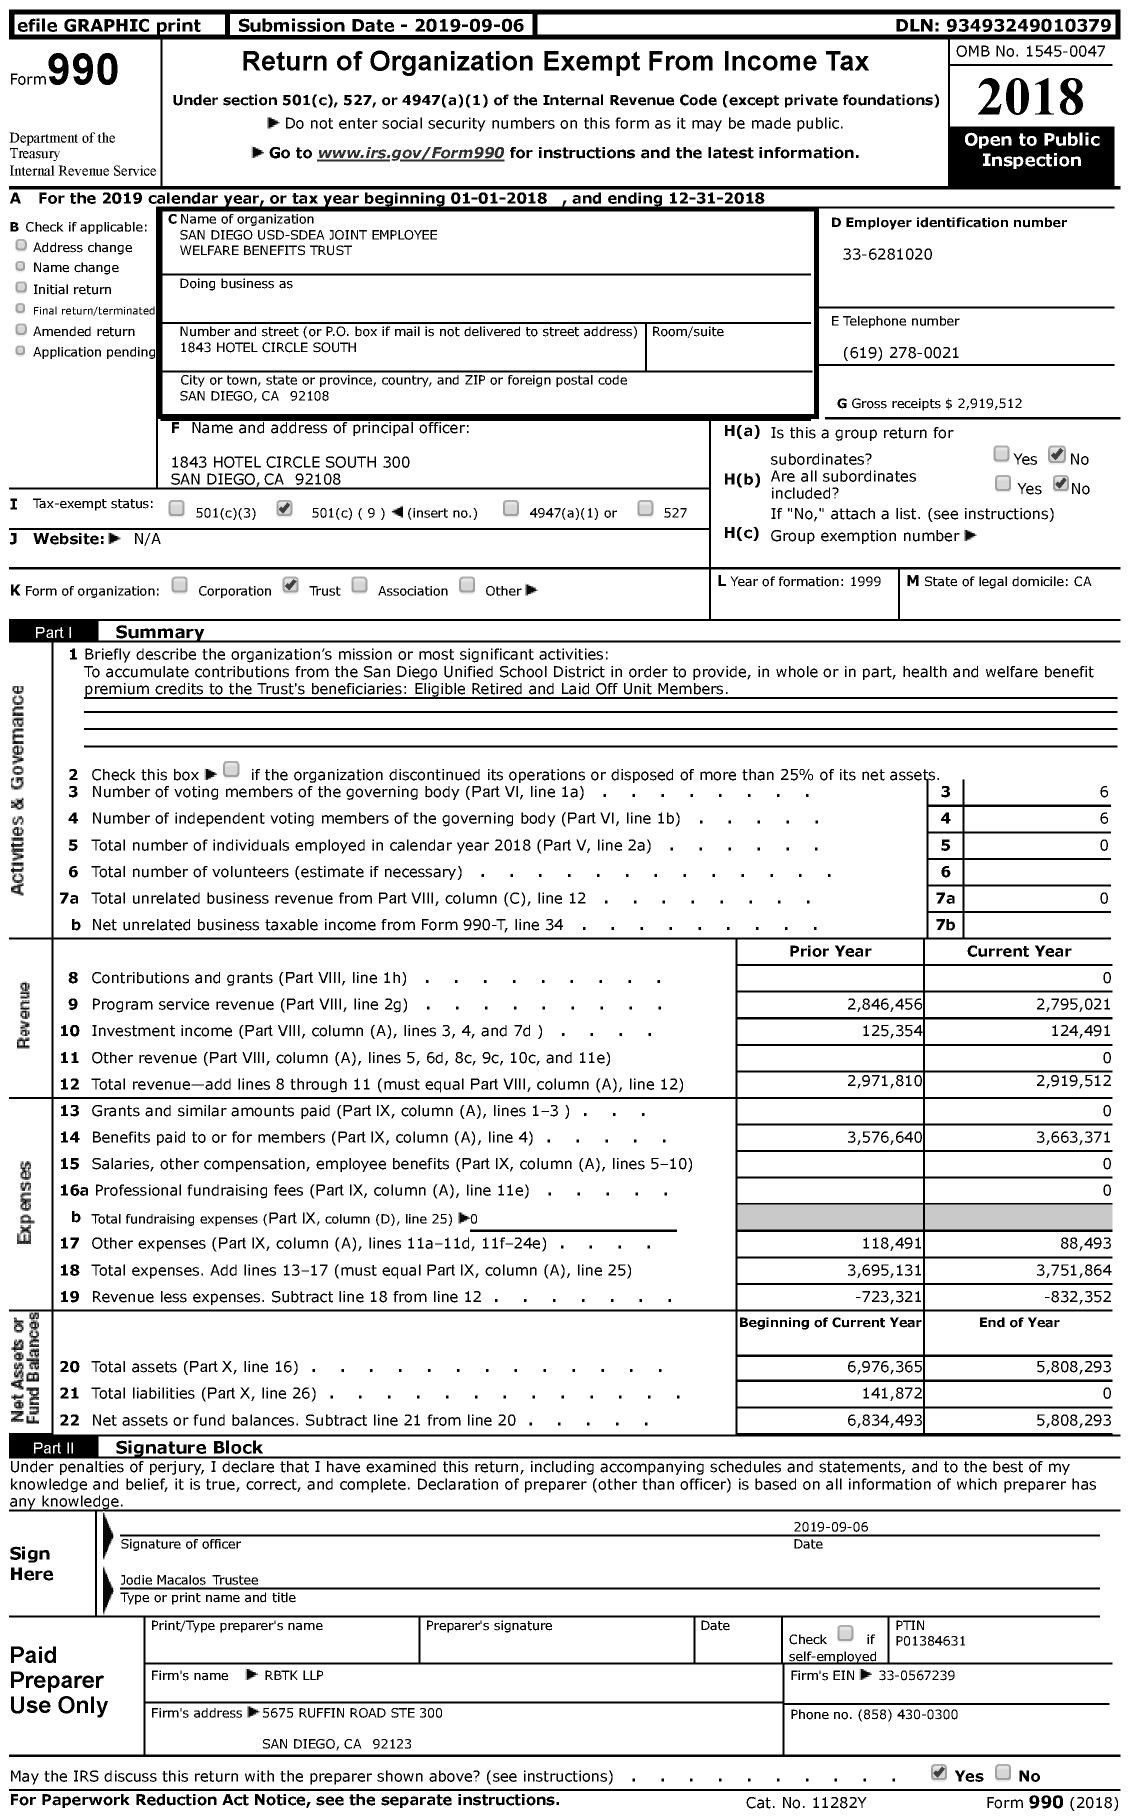 Image of first page of 2018 Form 990 for San Diego Usd-Sdea Joint Employee Welfare Benefits Trust